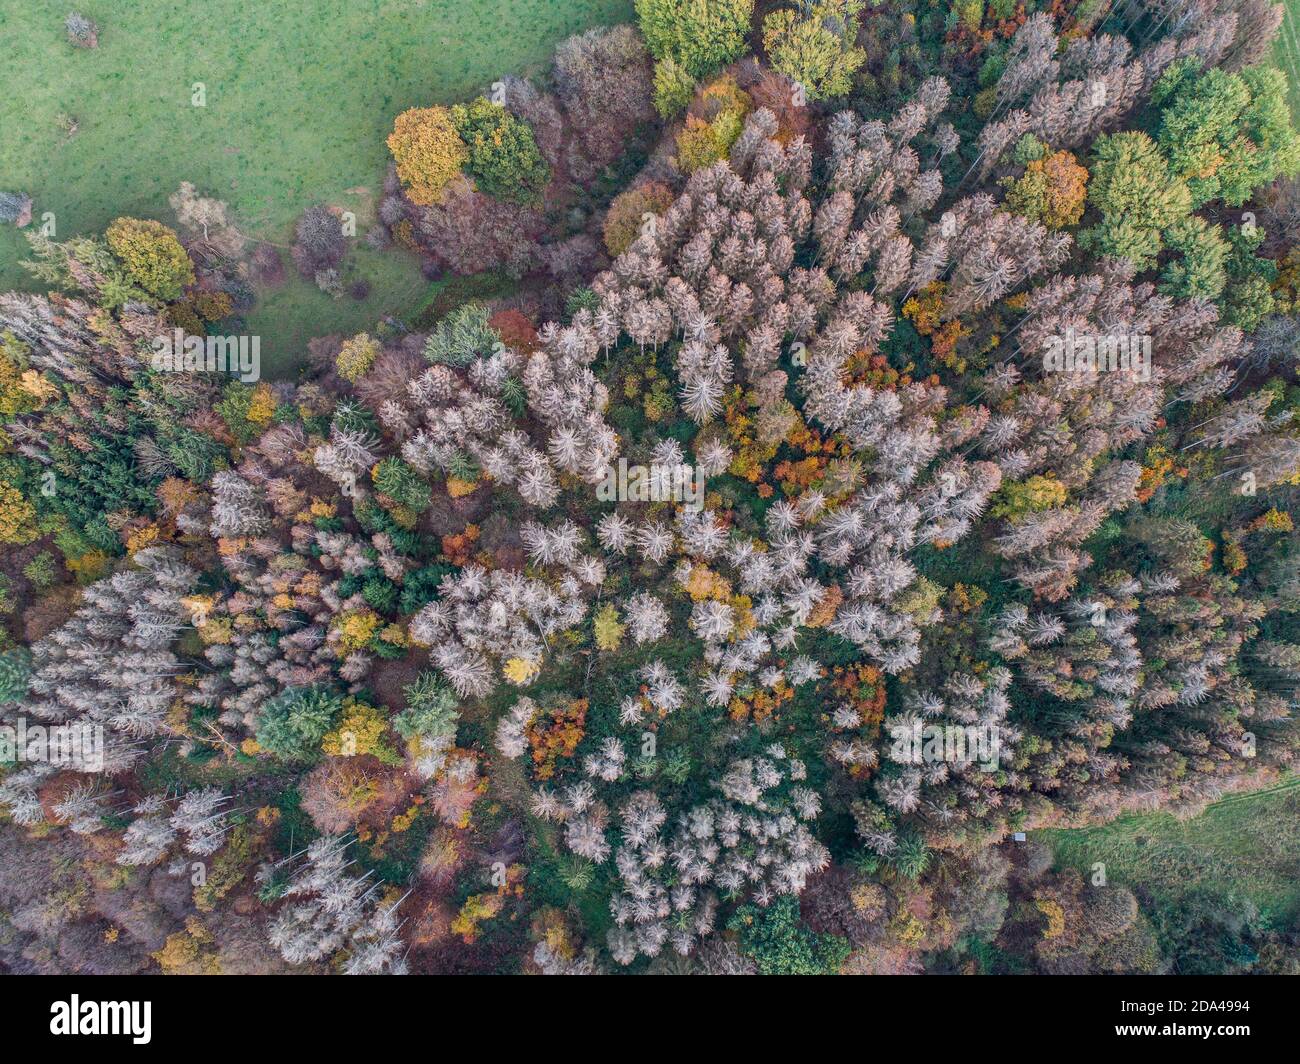 Aerial view green, orange and red autumn forest, with bark beatle infected dead trees different colors germany rhineland palantino Stock Photo